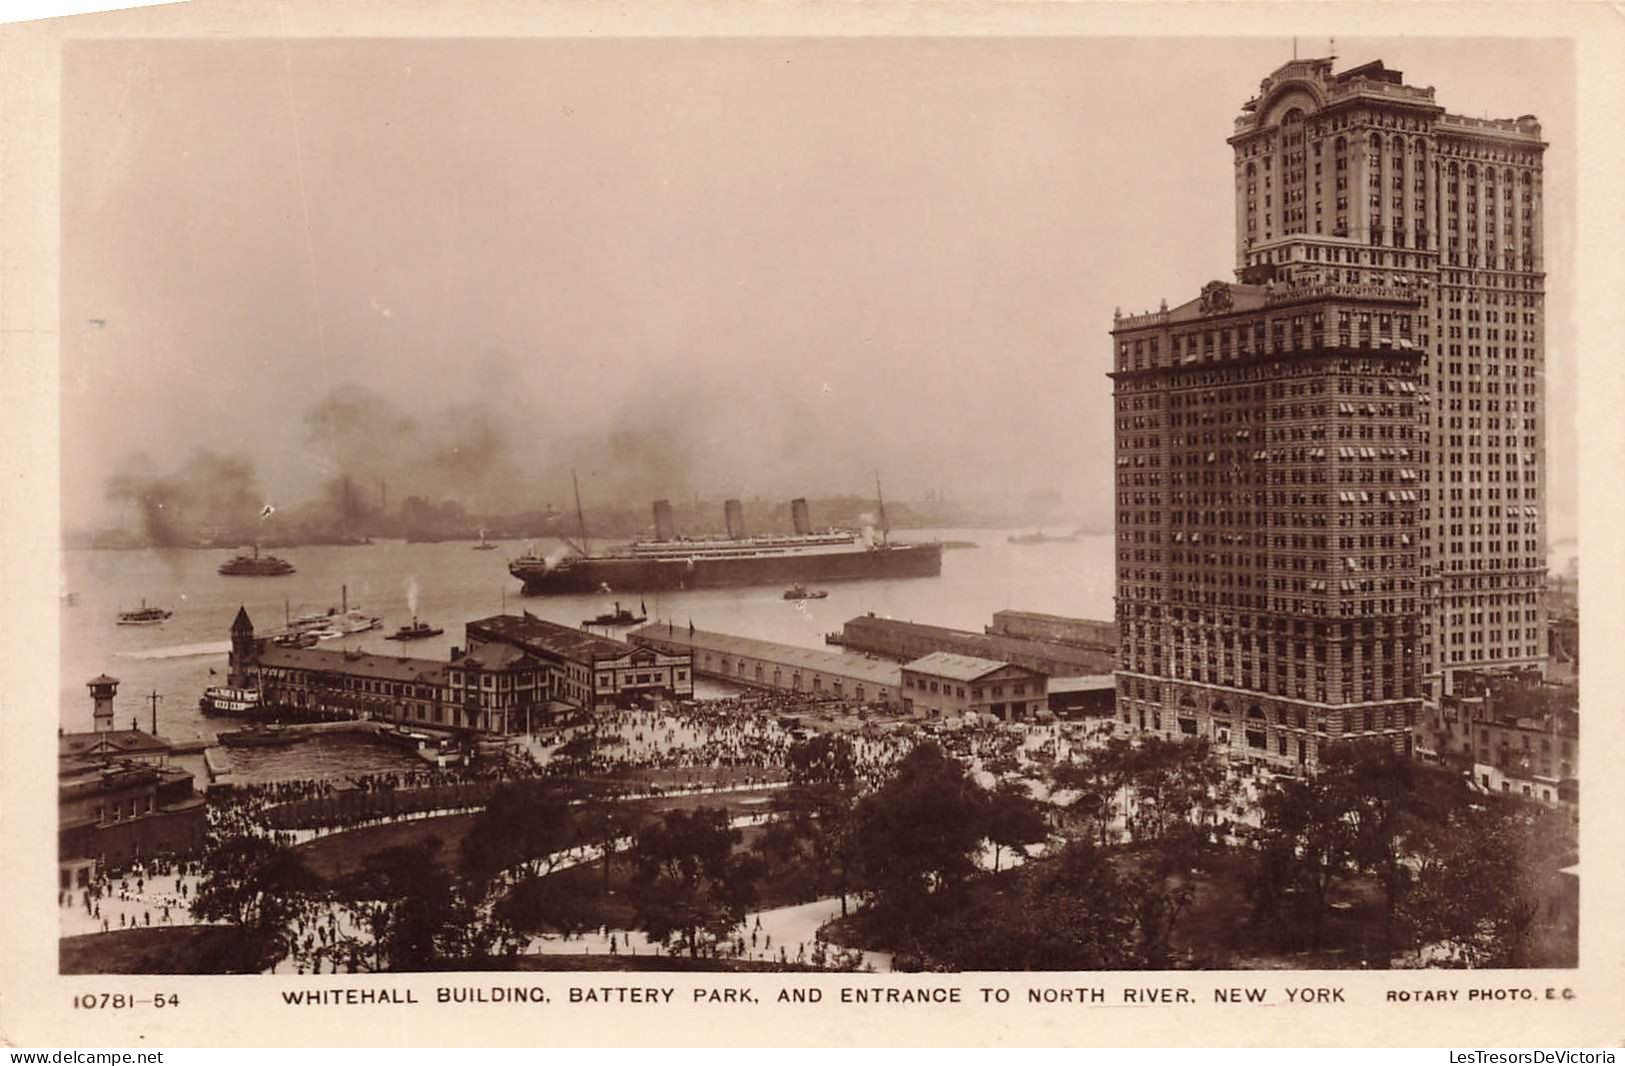 ETATS-UNIS - Whitehall Building - Battery Park And Entrance To North River - New York - Carte Postale Ancienne - Andere Monumente & Gebäude